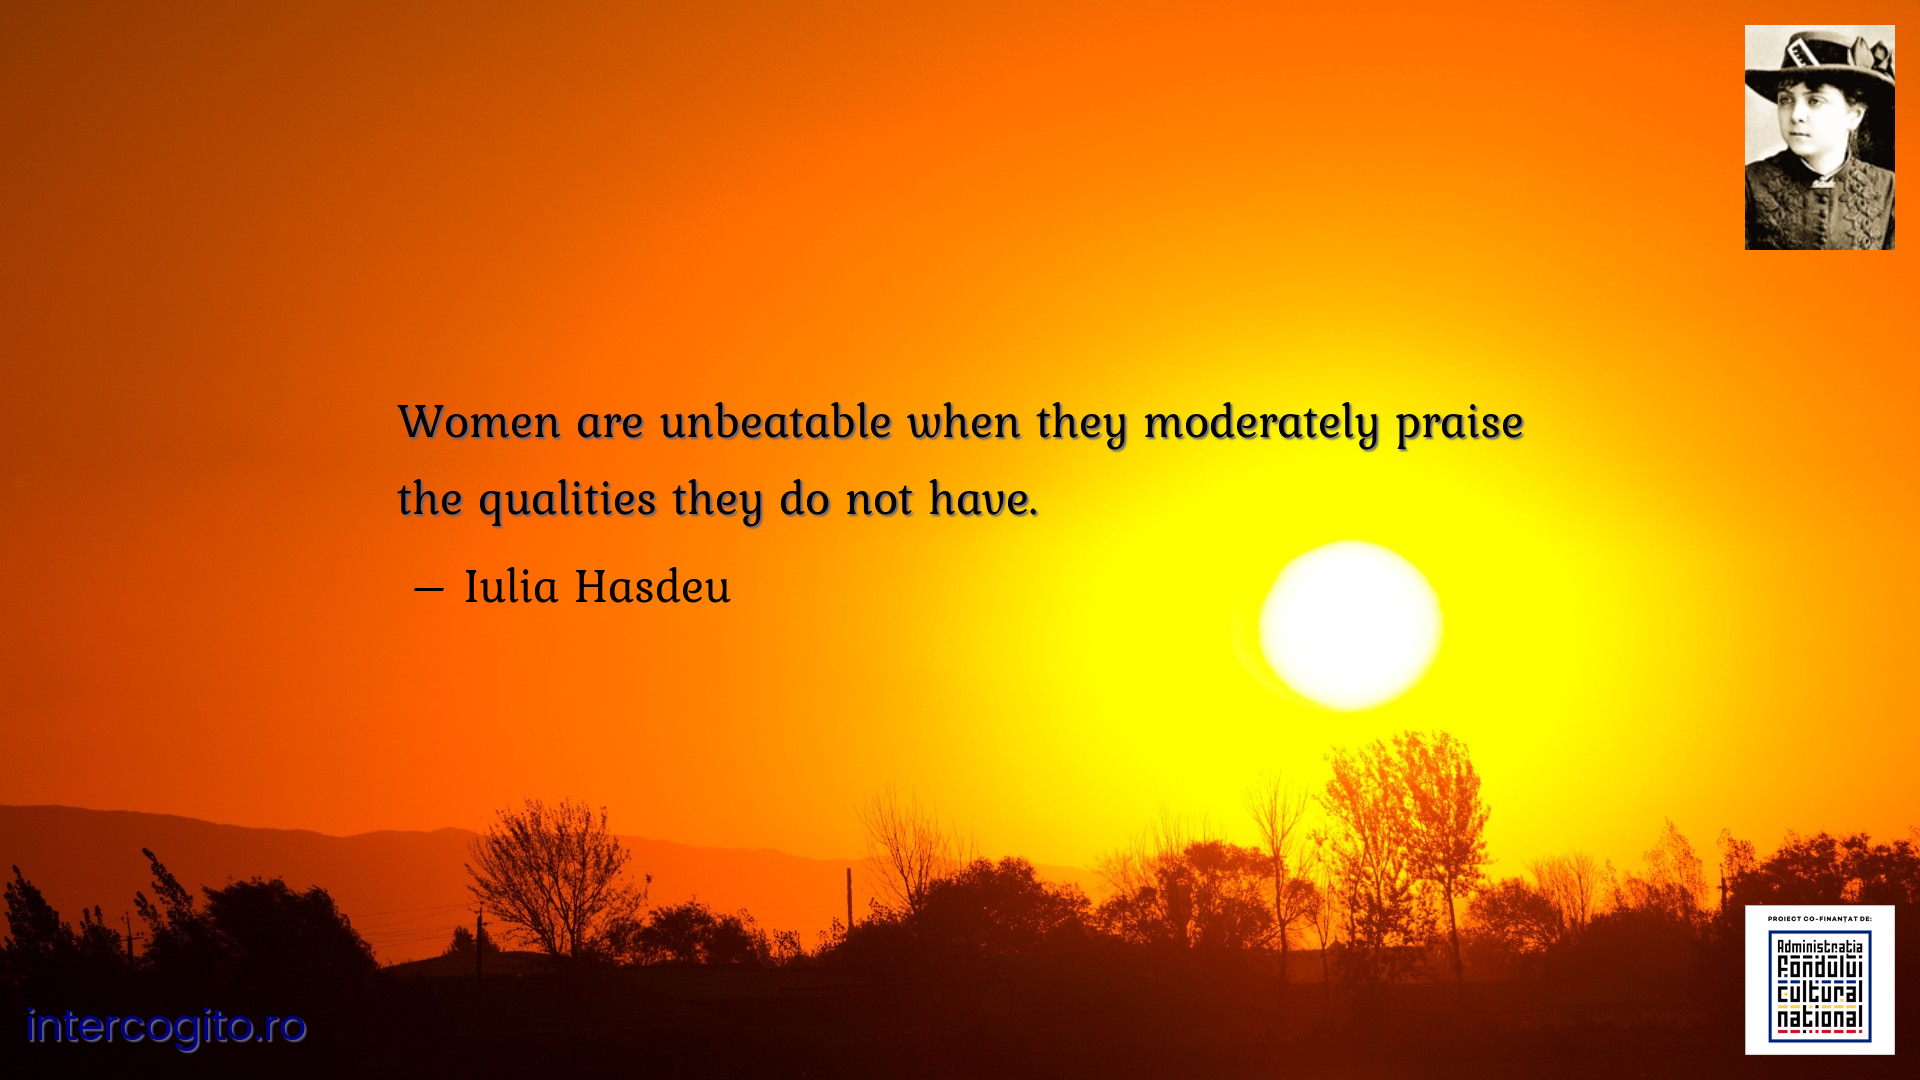 Women are unbeatable when they moderately praise the qualities they do not have.